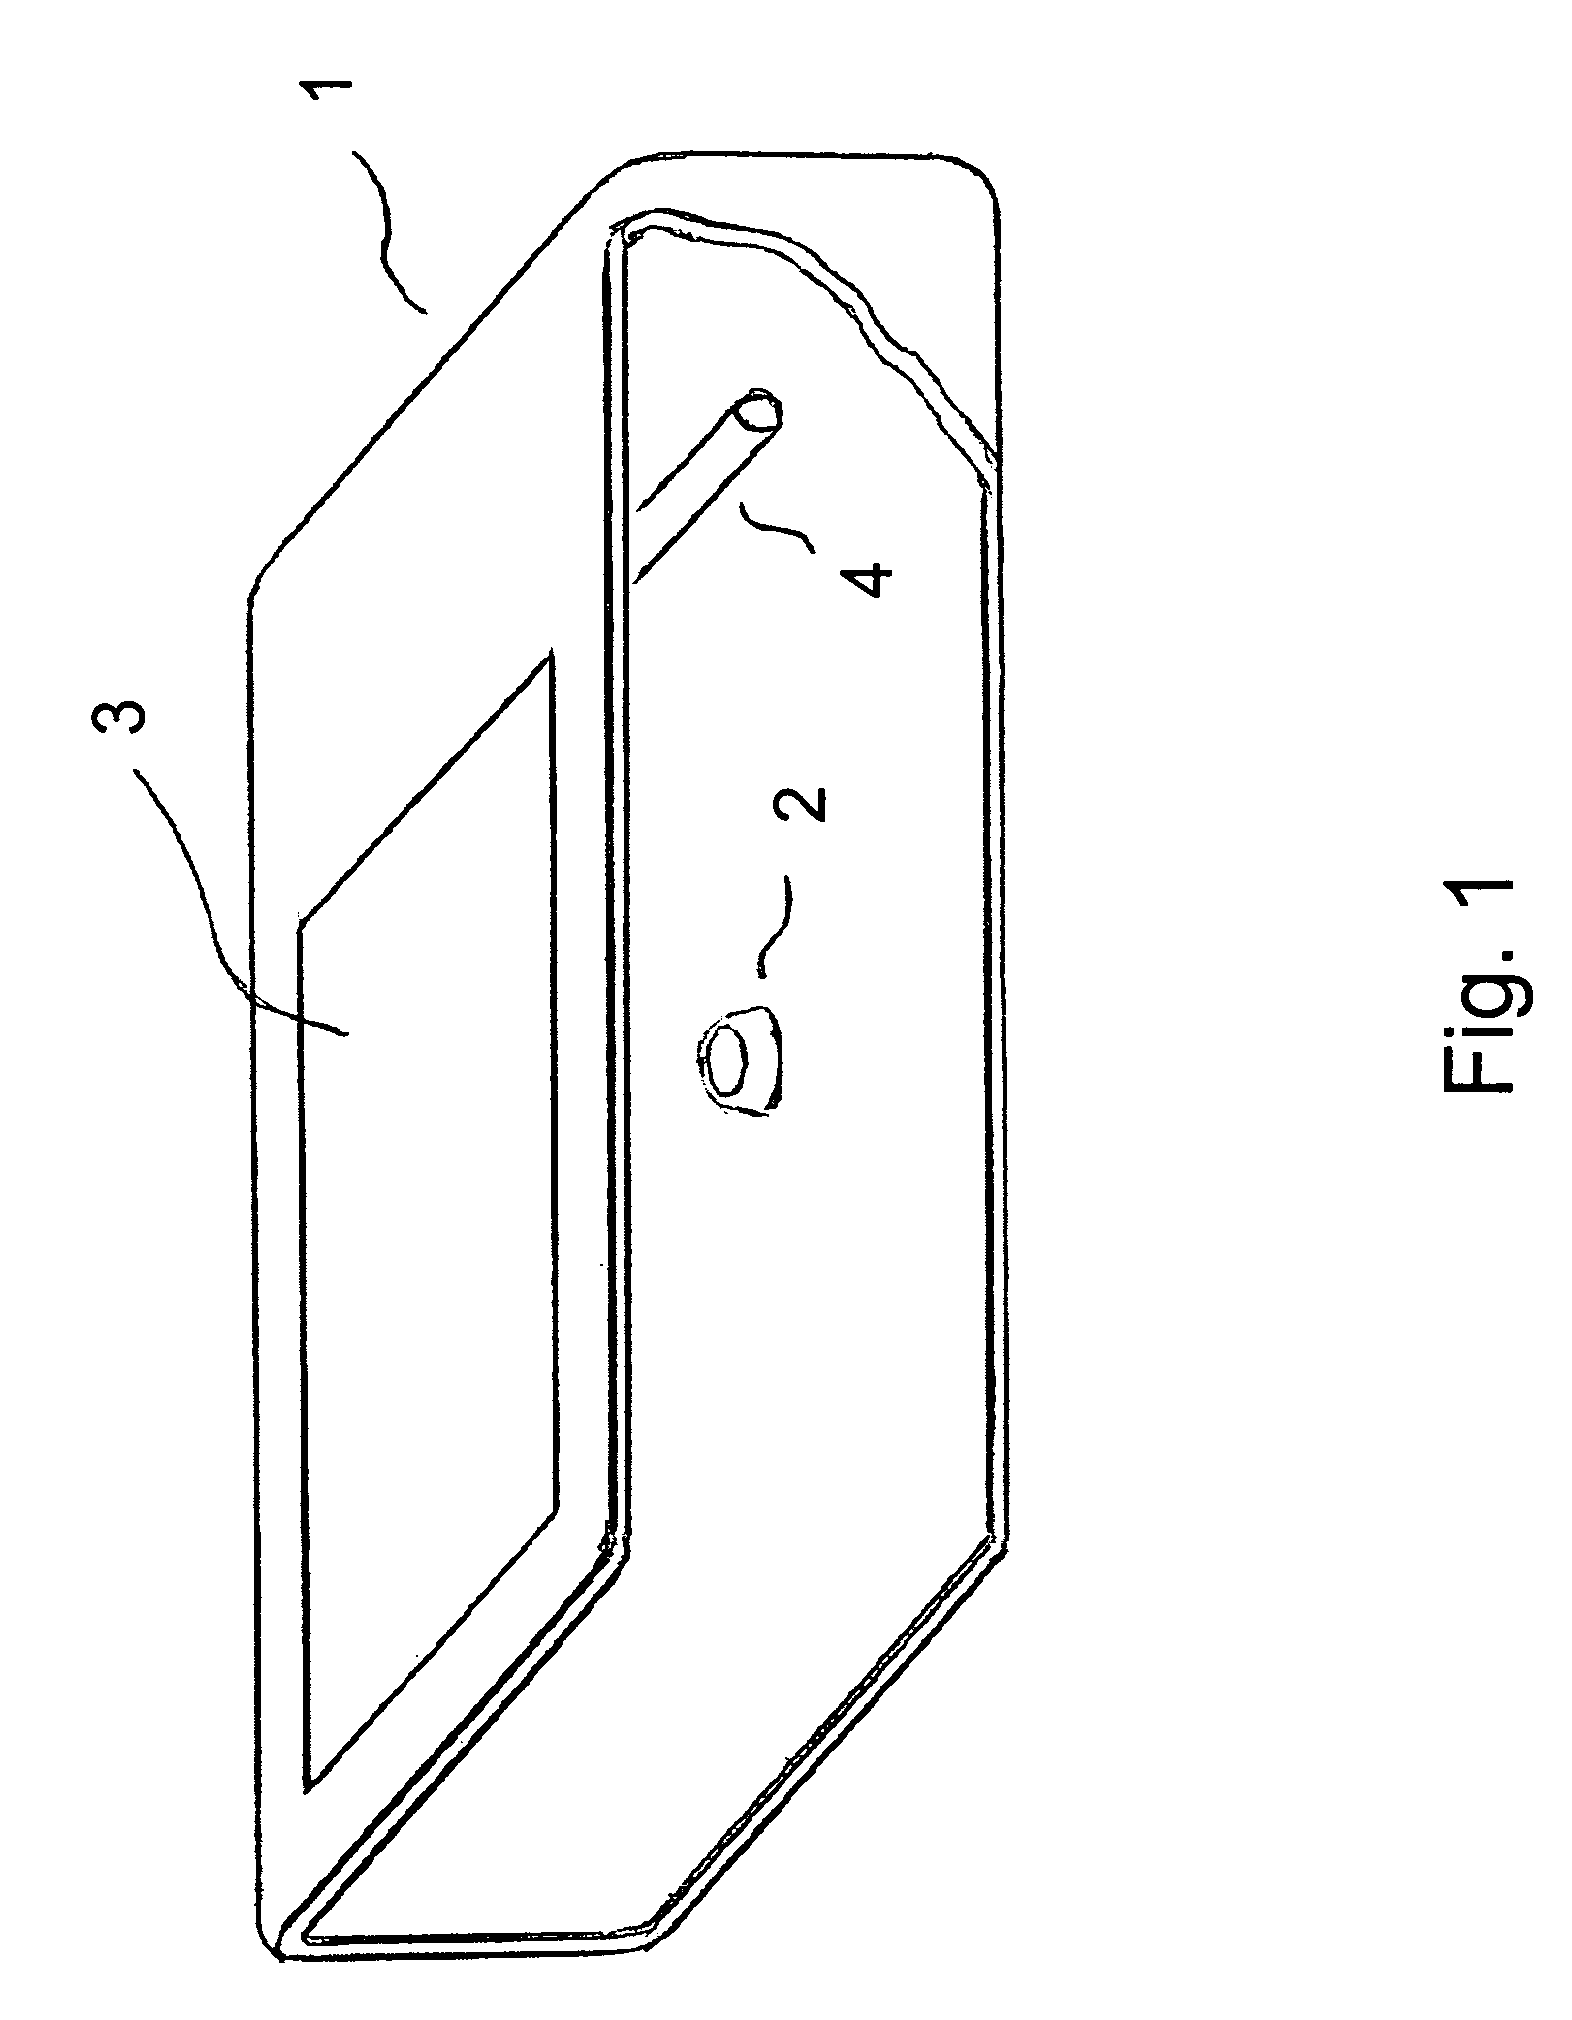 Optical imaging device